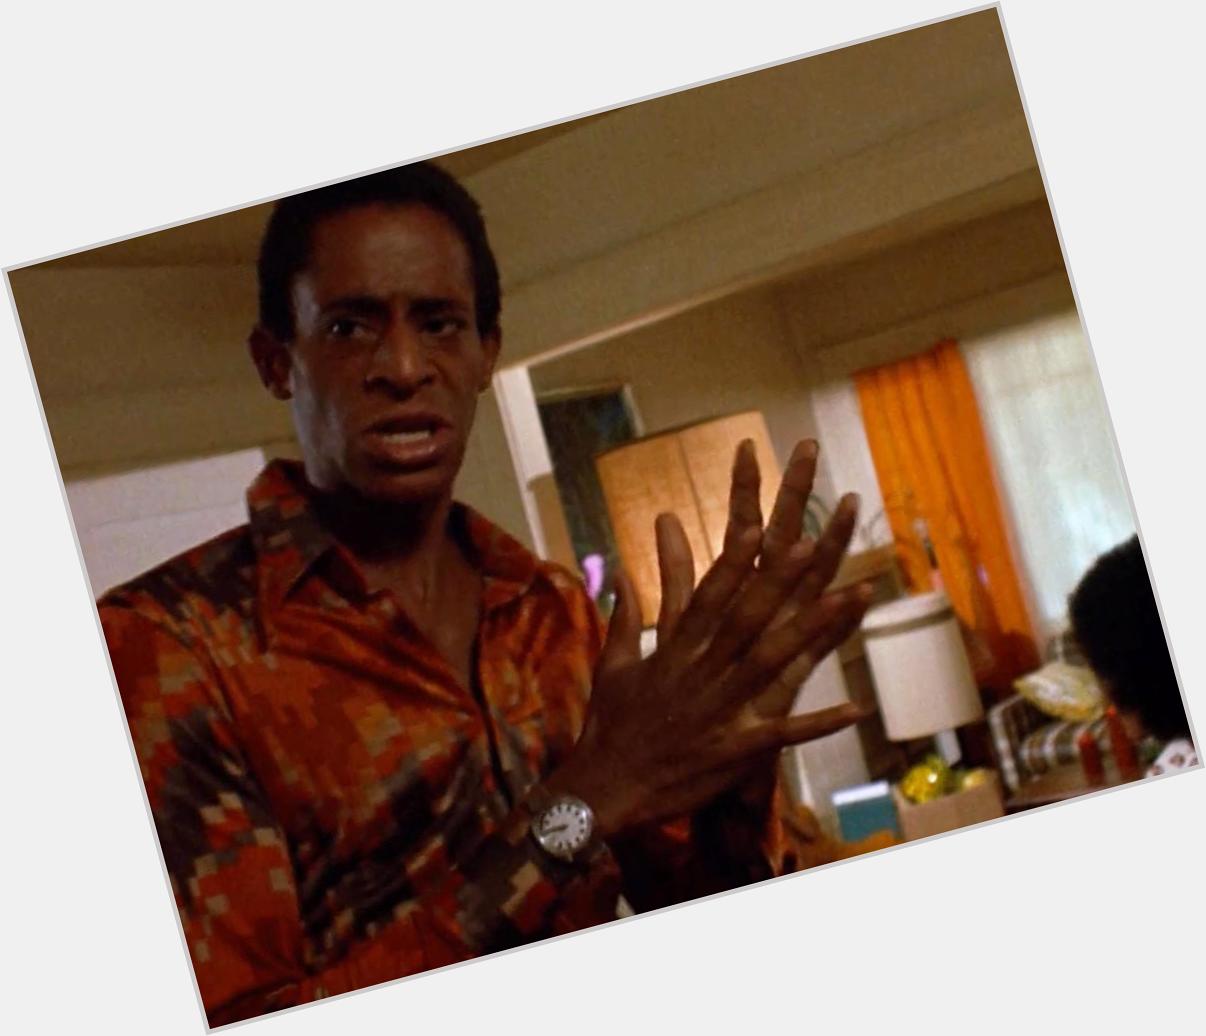 Happy 69th birthday to Antonio Fargas, who played Foxy\s brother Link in 1974\s FOXY BROWN!  